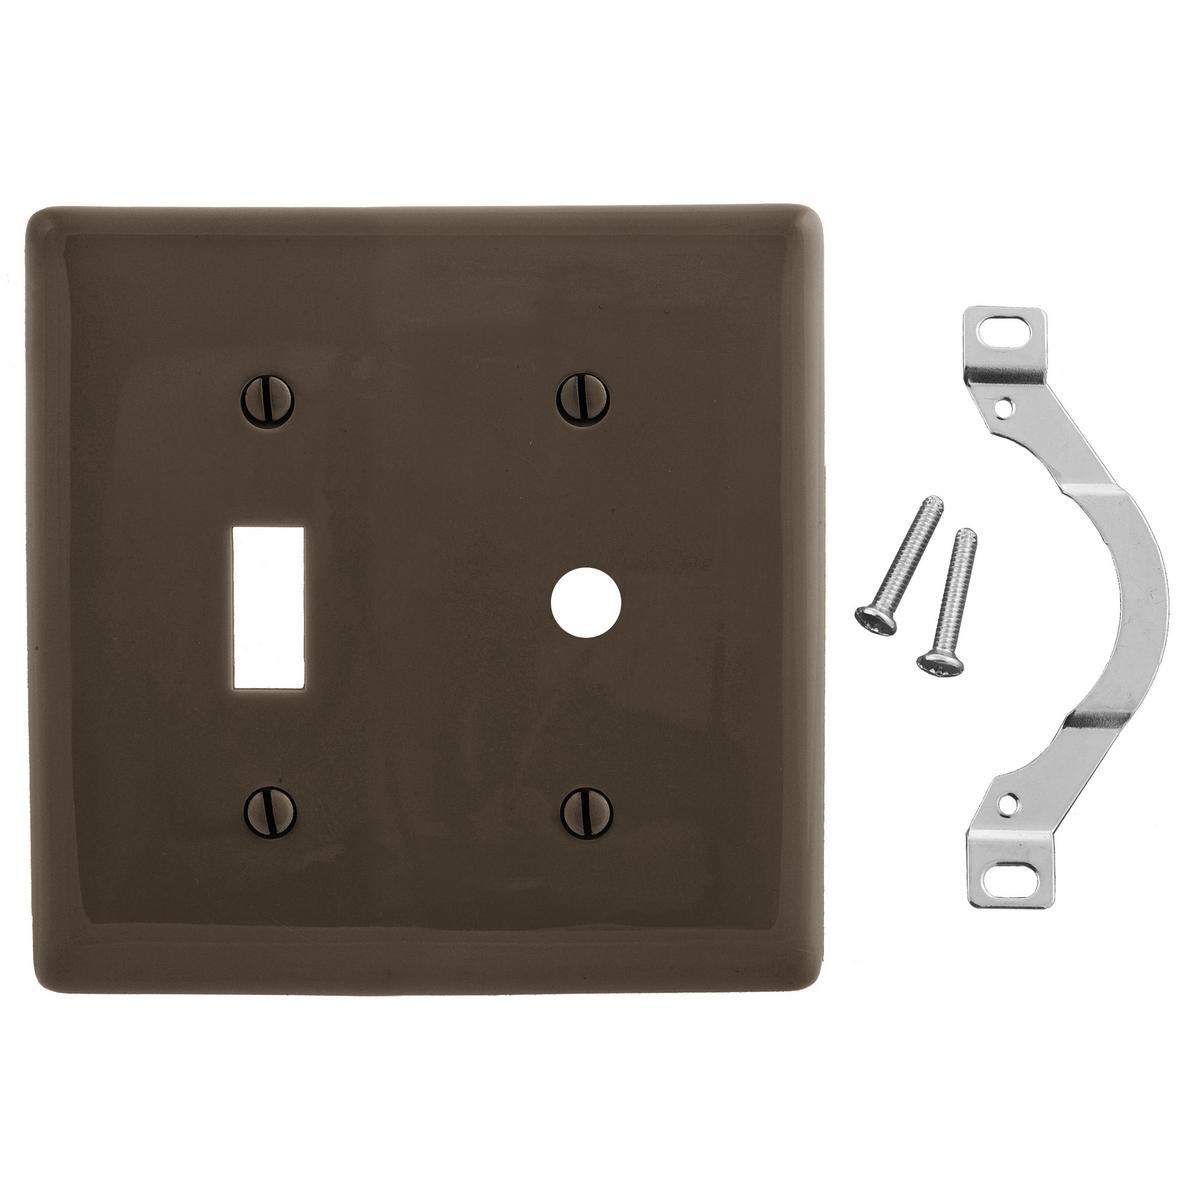 Hubbell NP112 Wallplates, Nylon, 2-Gang, 1) Toggle, 1) .406" Opening, Brown  ; Reinforcement ribs for extra strength ; High-impact, self-extinguishing nylon material ; Captive screw feature holds mounting screw in place ; Standard Size is 1/8" larger to give you extra 